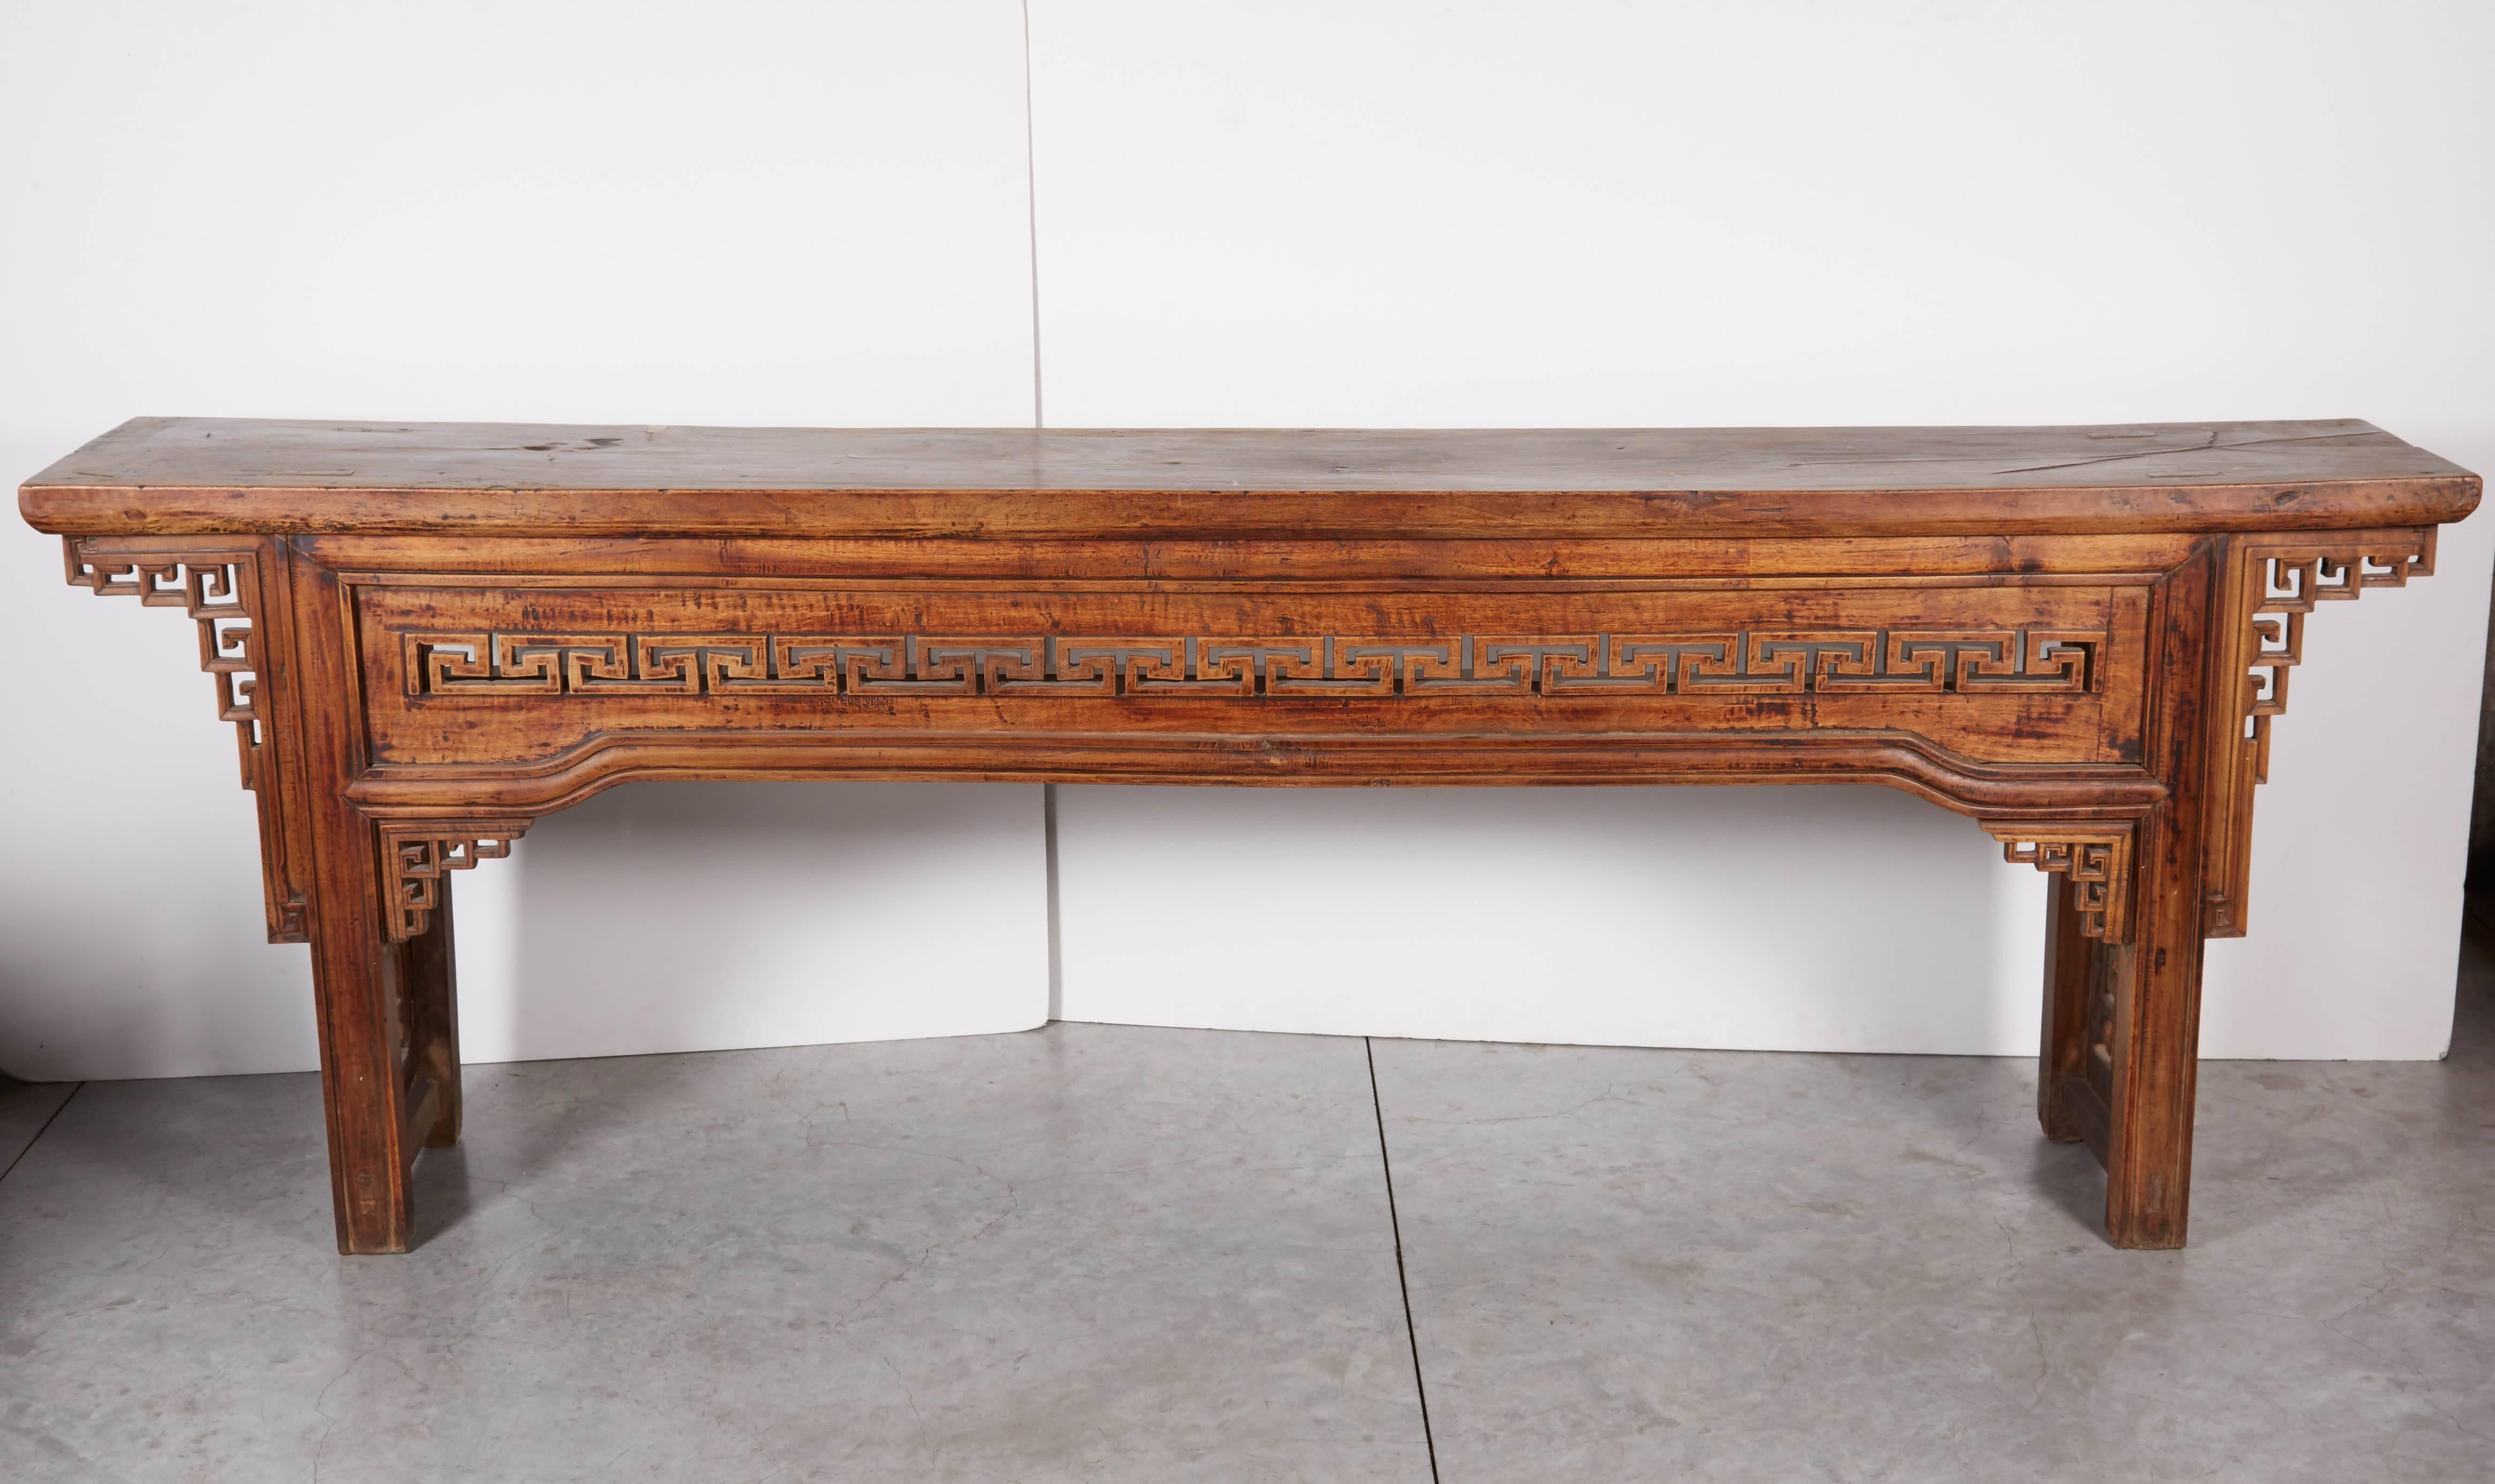 An unusual 19th Century Chinese walnut altar table with simple decorative carvings. This piece has a solid walnut top with a remarkably beautiful patina. From Xian, c. 1850.
T515